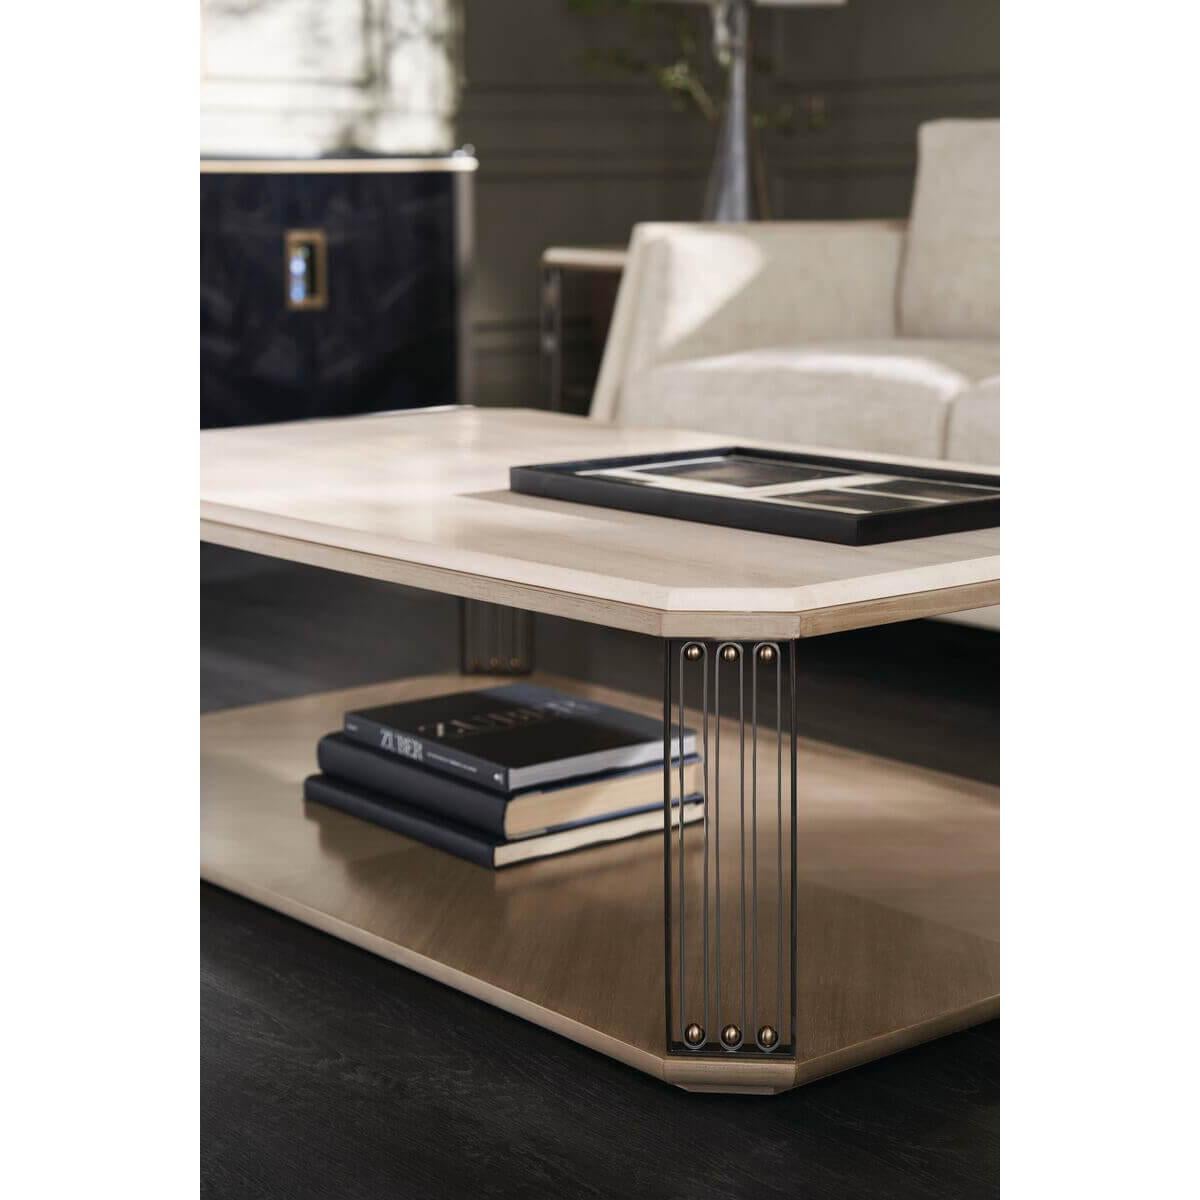 Inspired by the bent metal work of notable French designer Jean Prouvé. Features an elegant yet durable Crème Travertine stone top, softened by an ogee detail and canted corners. Ornamental legs are crafted in a fusion of Deep Bronze, Brushed Gold,